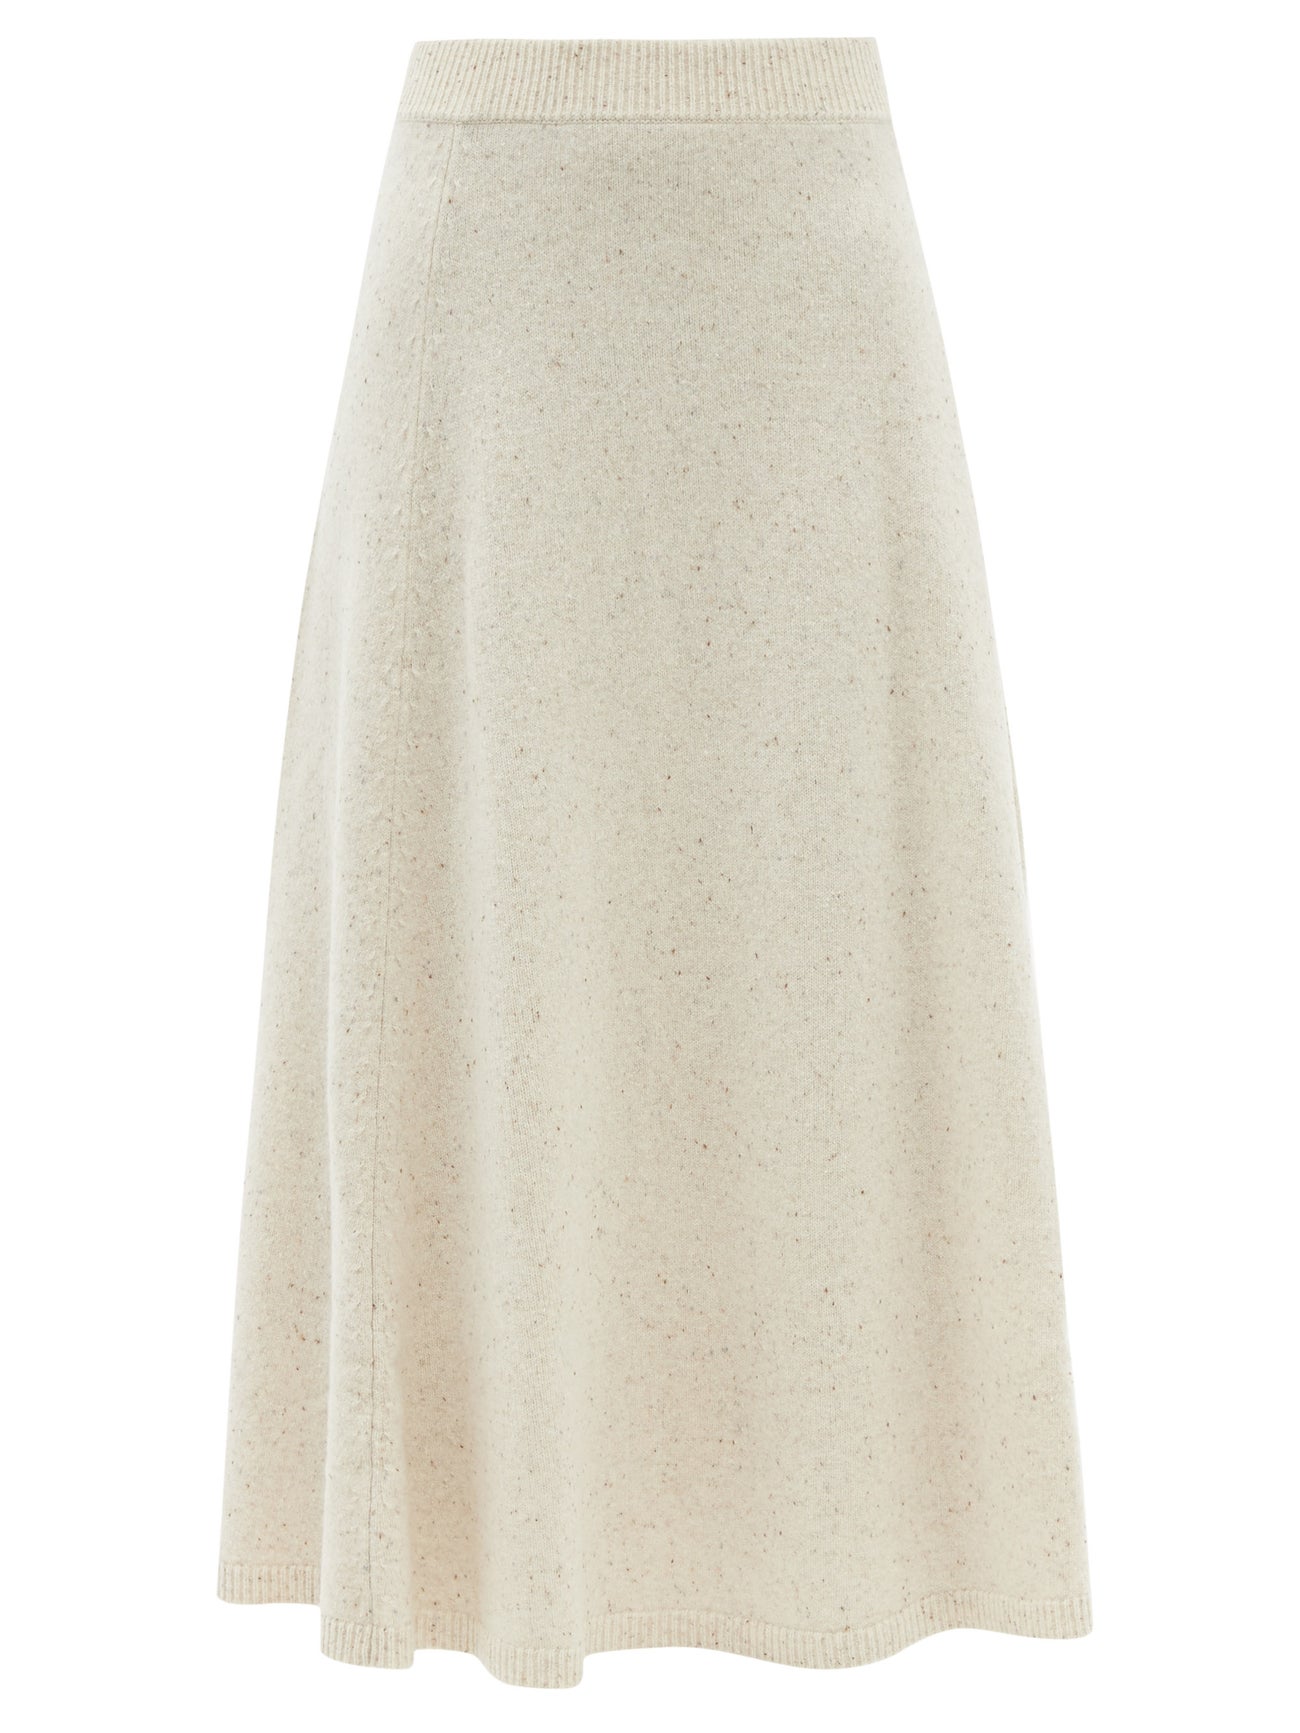 28 Knitted Midi Skirts the Style Set Is Loving Right Now | Who What Wear UK